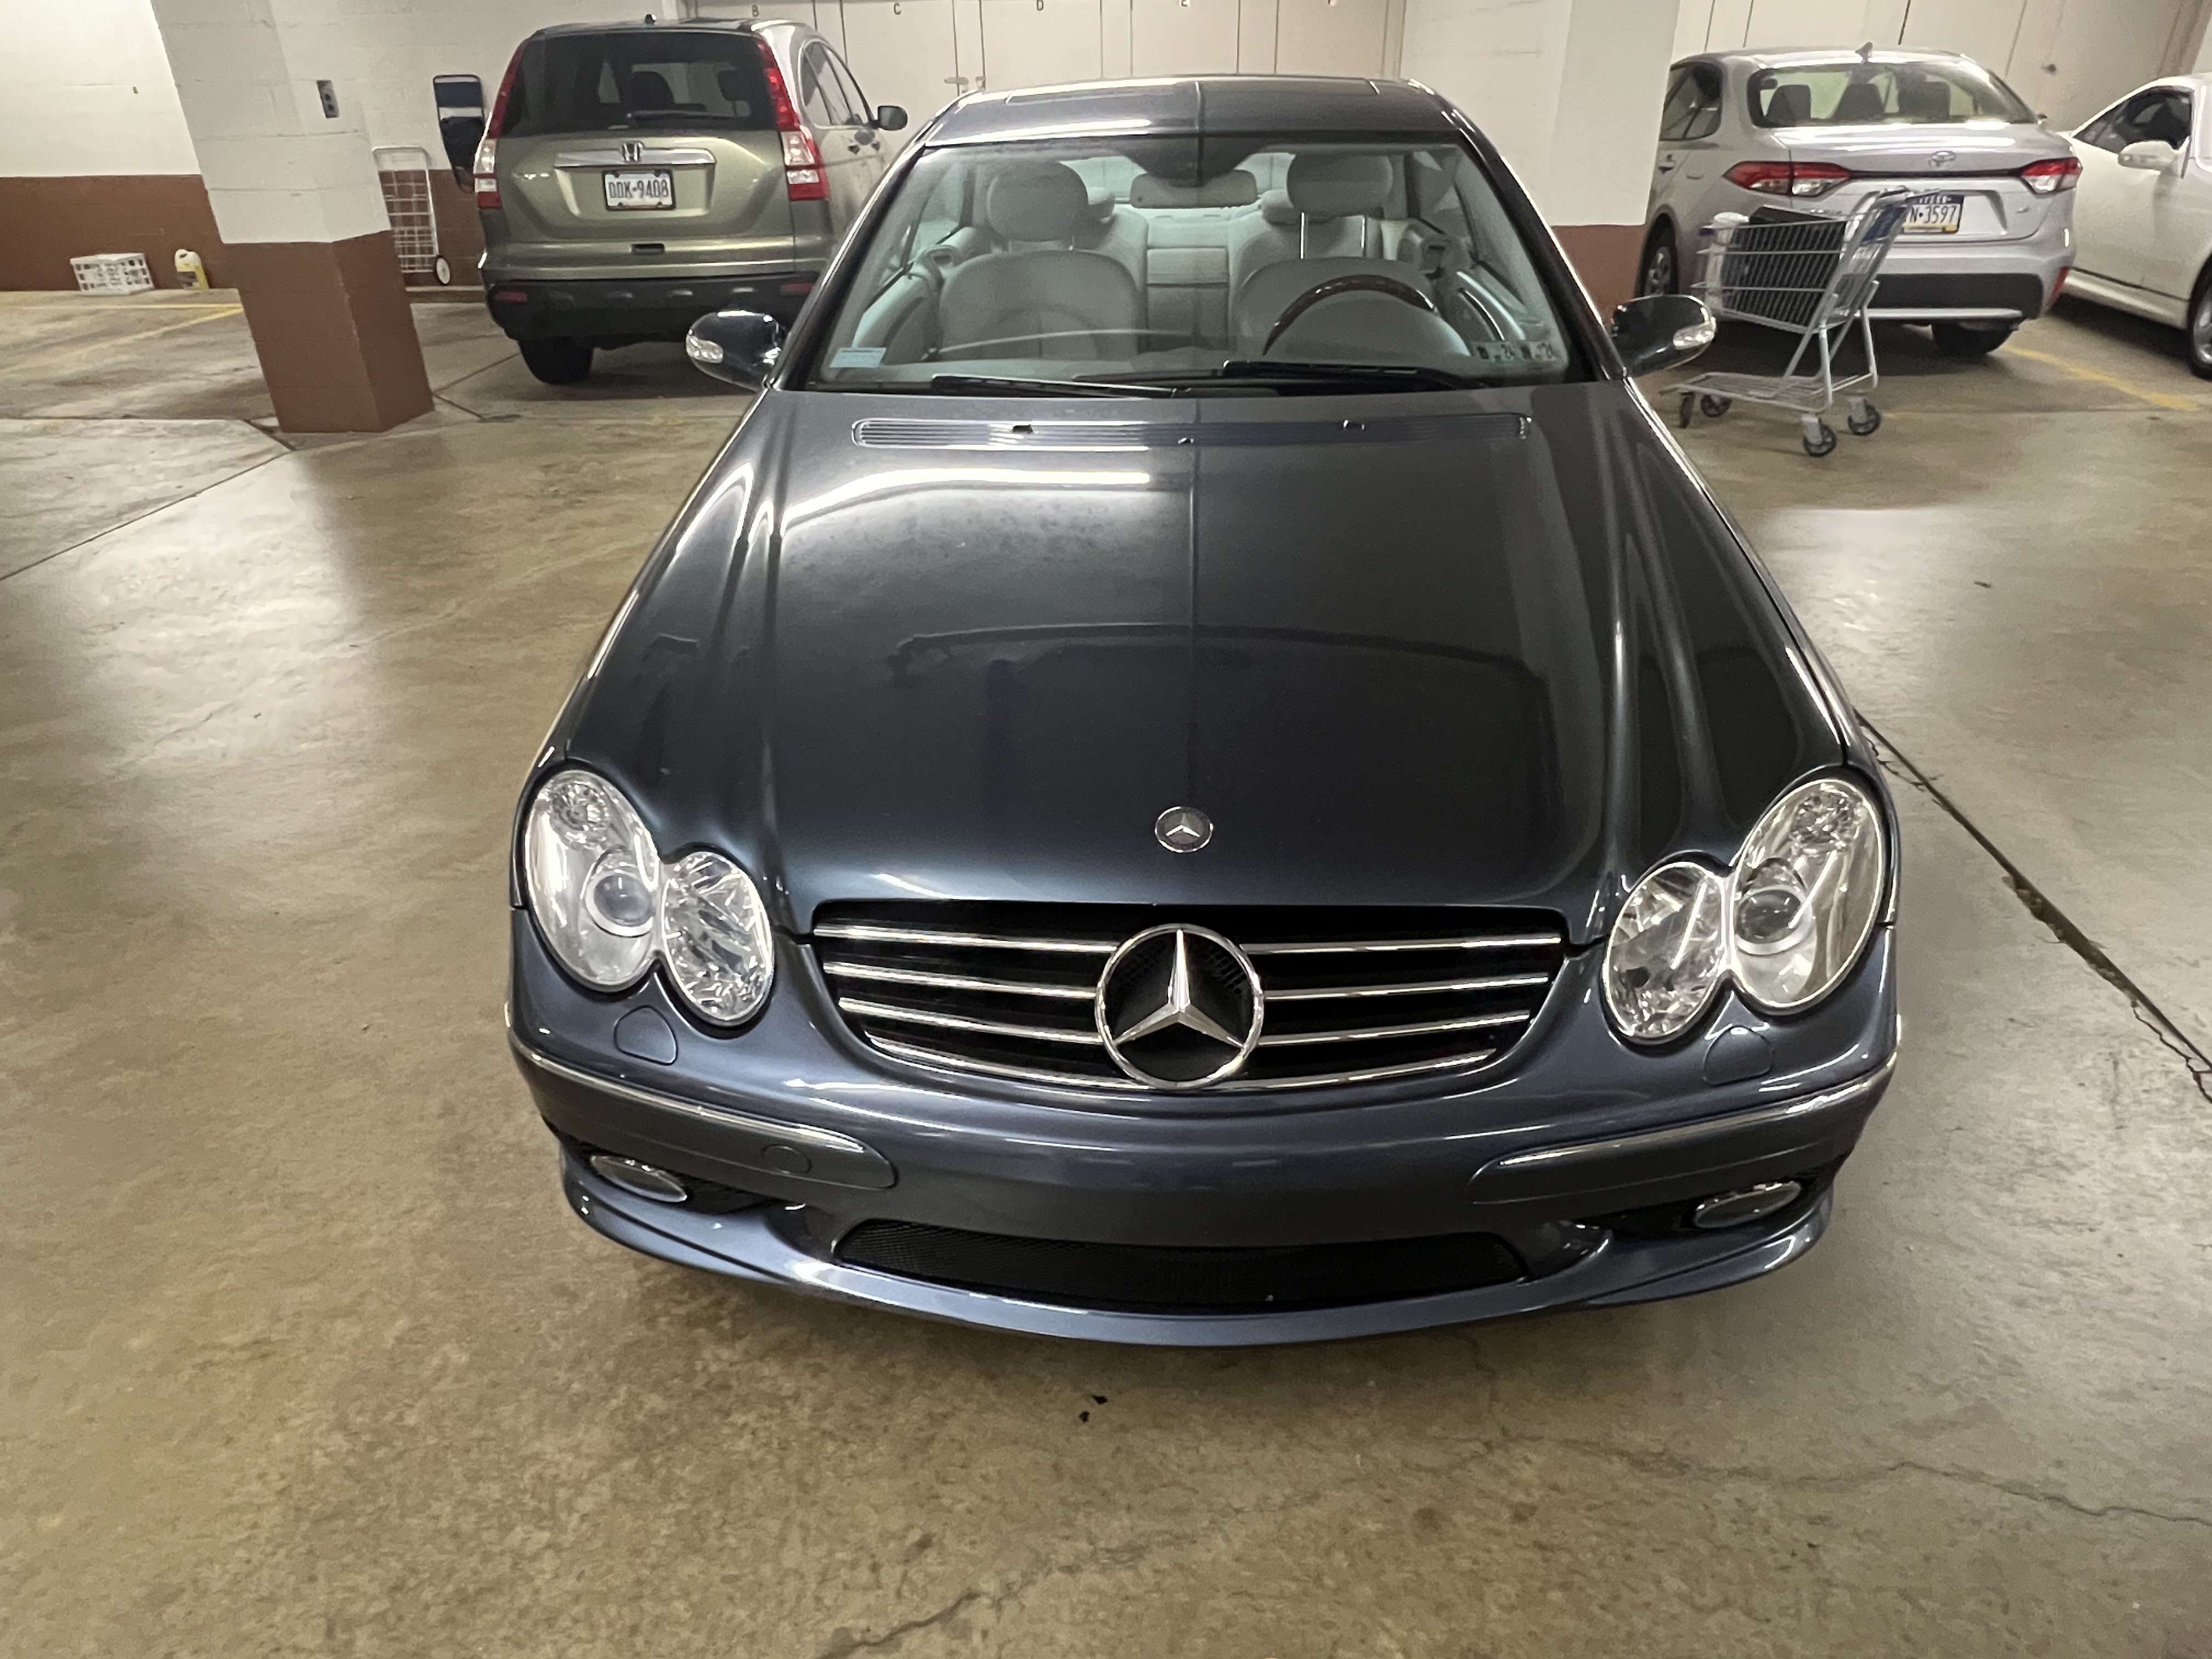 Used Mercedes-Benz CLK 500 for Sale Right Now - Autotrader